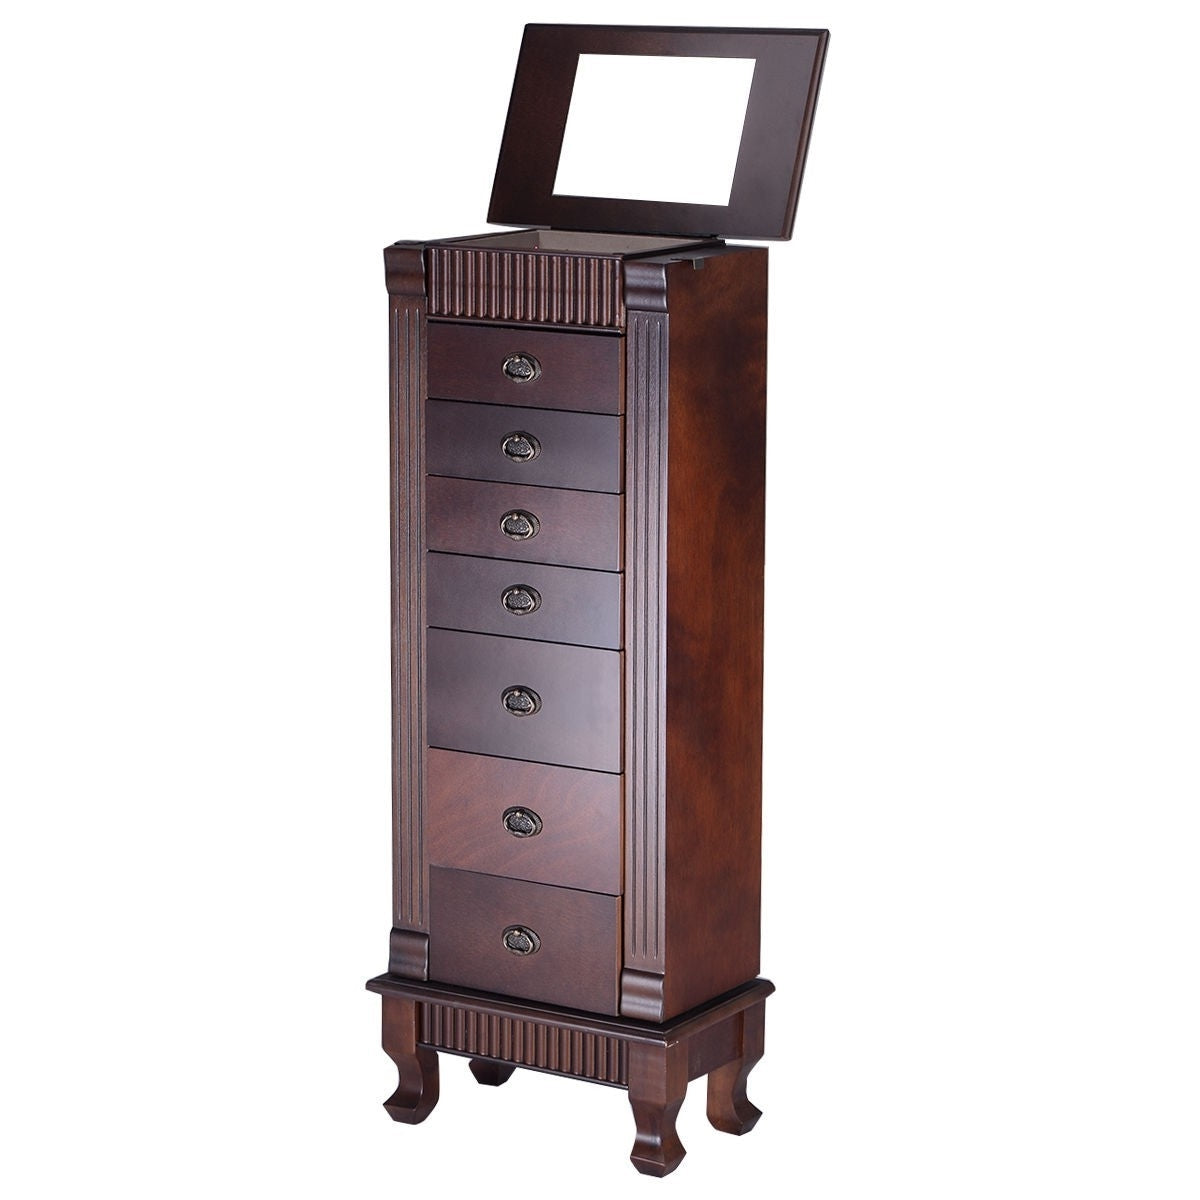 FastFurnishings Classic 7-Drawer Jewelry Armoire Wood Storage Chest Cabinet